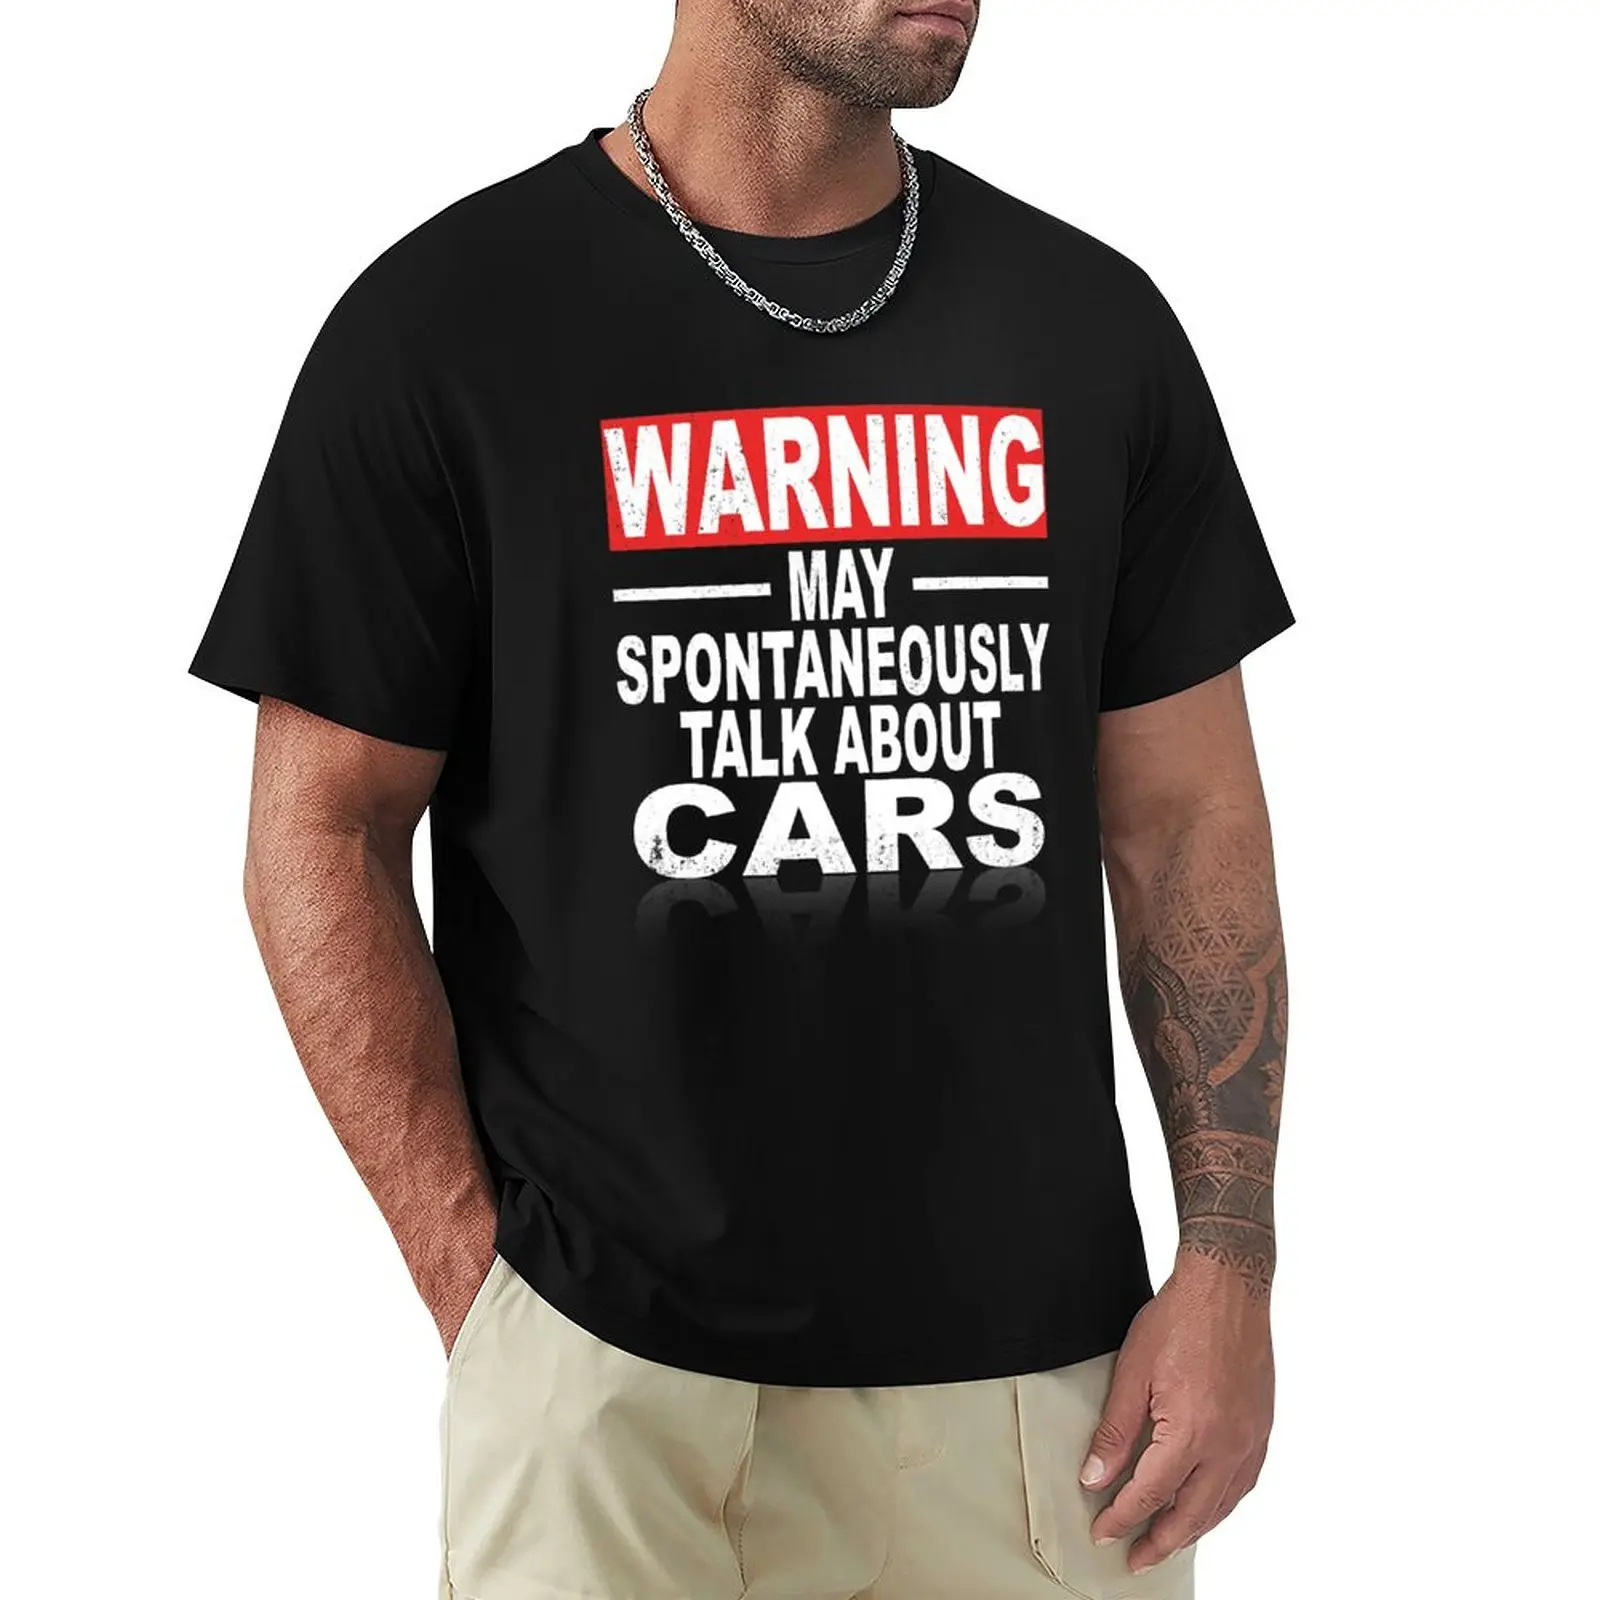 

Warning: May Spontaneously Talk About Cars T-Shirt Vintage T Shirt Funny T Shirts Clothes For Men